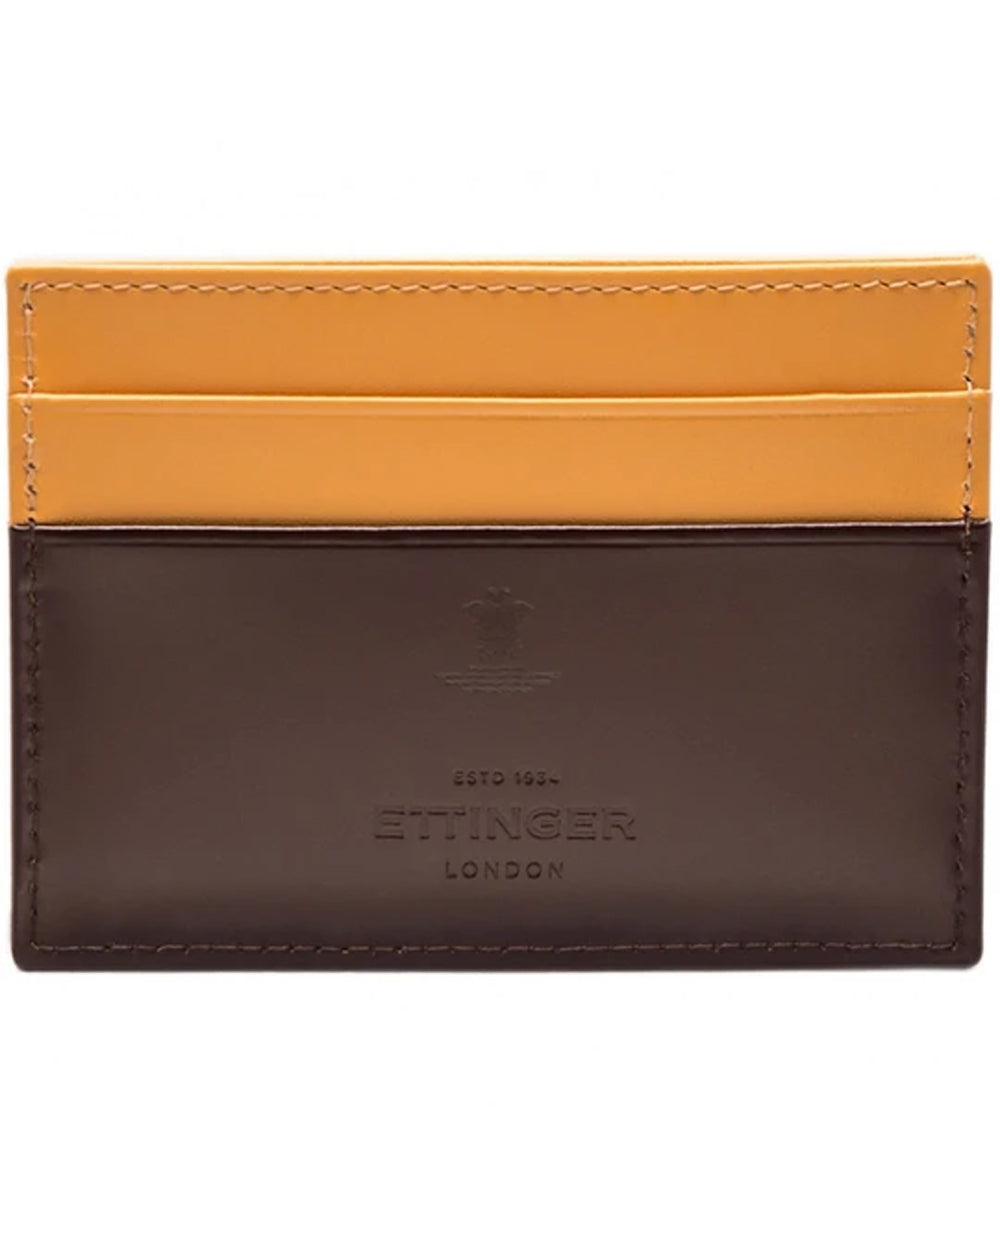 Brown and Canary Flat Card Case